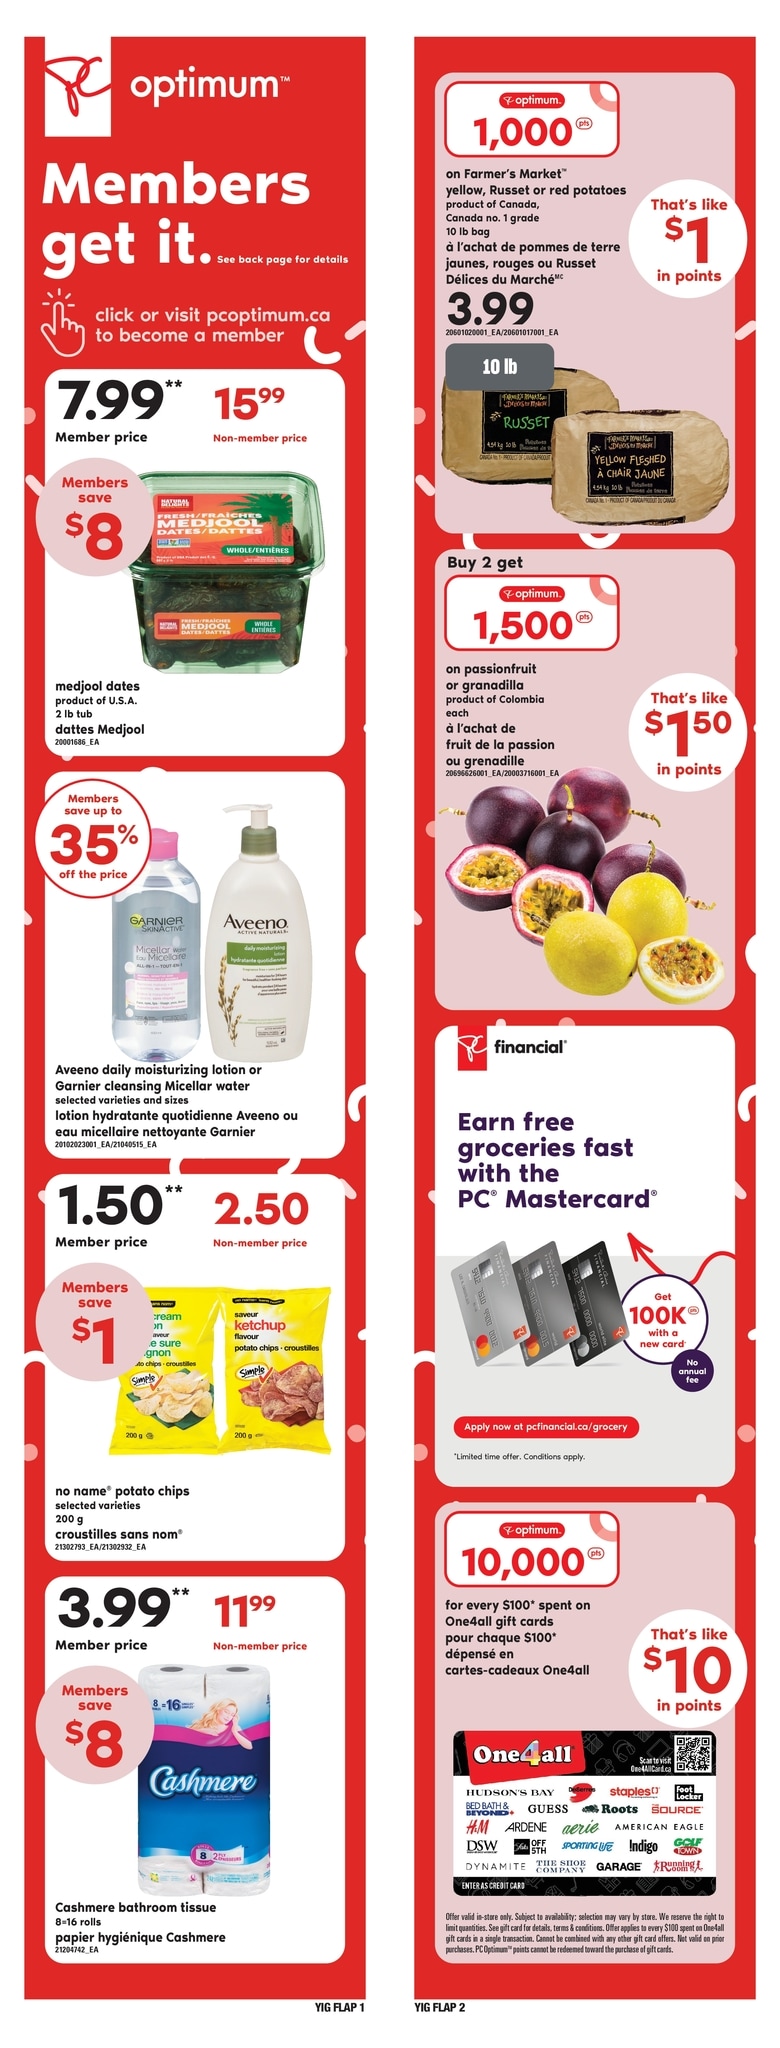 Independent - Ontario - Weekly Flyer Specials - Page 2